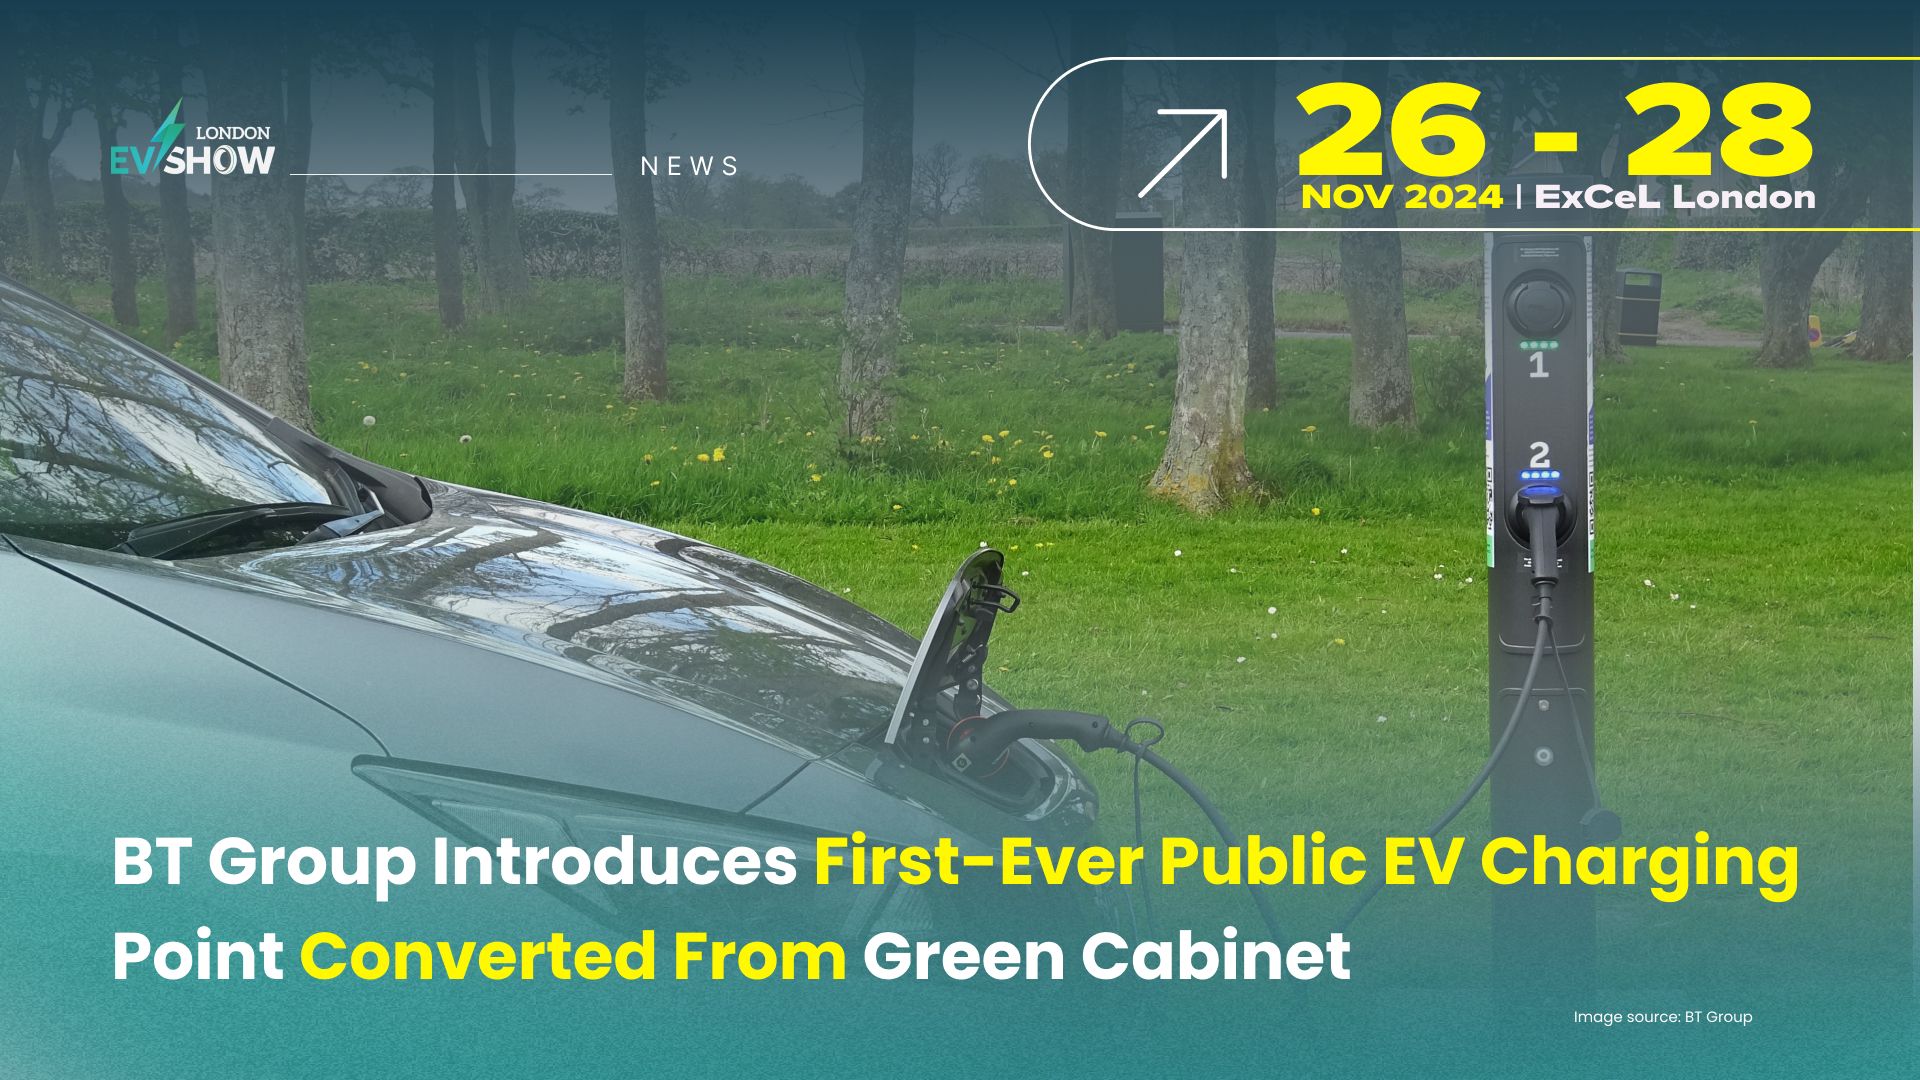 BT Group Introduces First-Ever Public EV Charging Point Converted From Green Cabinet